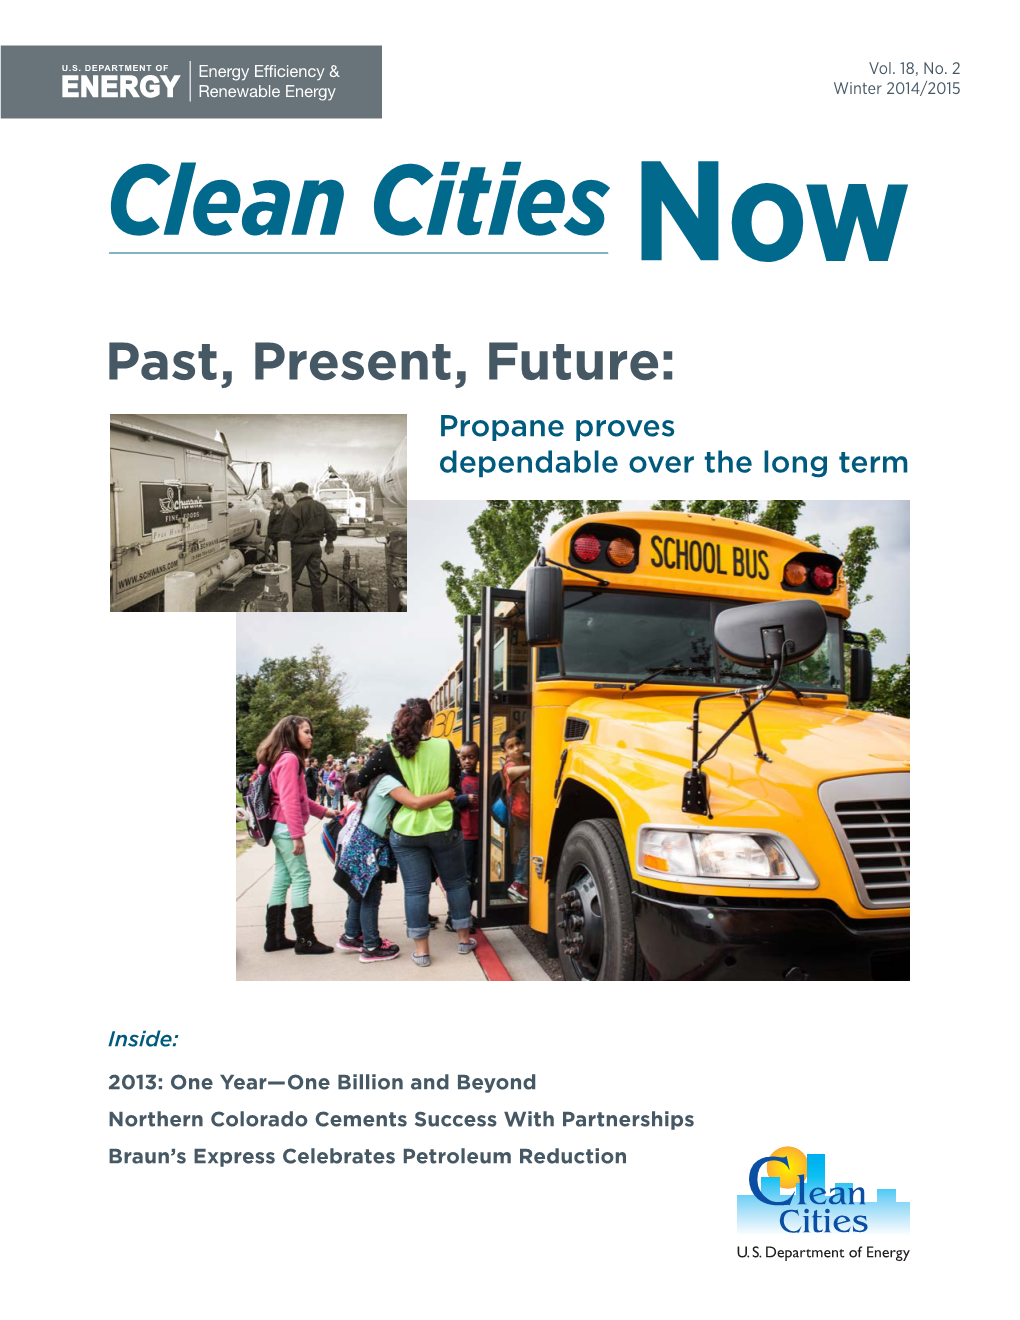 Clean Cities Now Vol. 18, No. 2